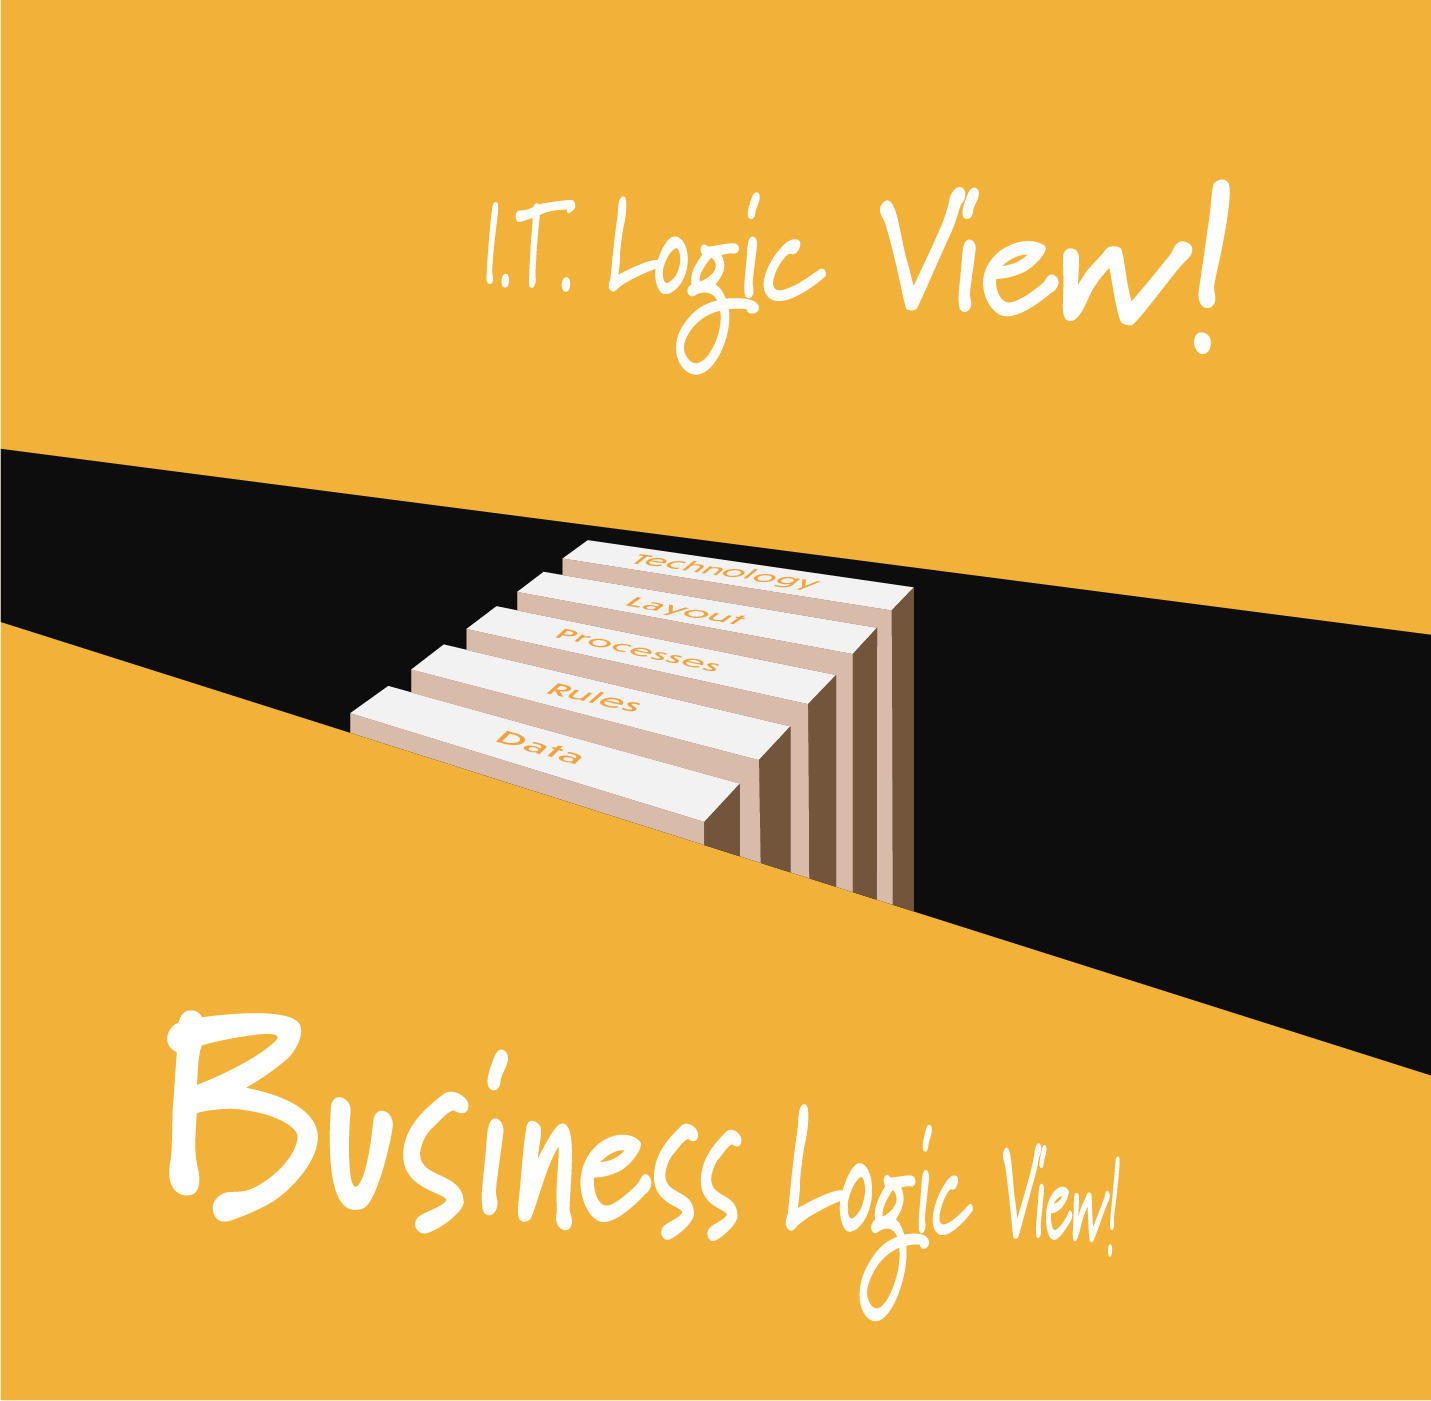 Image of the key elements (Data, Rules, Processes, Layouts, Technology) supporting the bridge and closing the gap between the business logic view and the IT logic view!